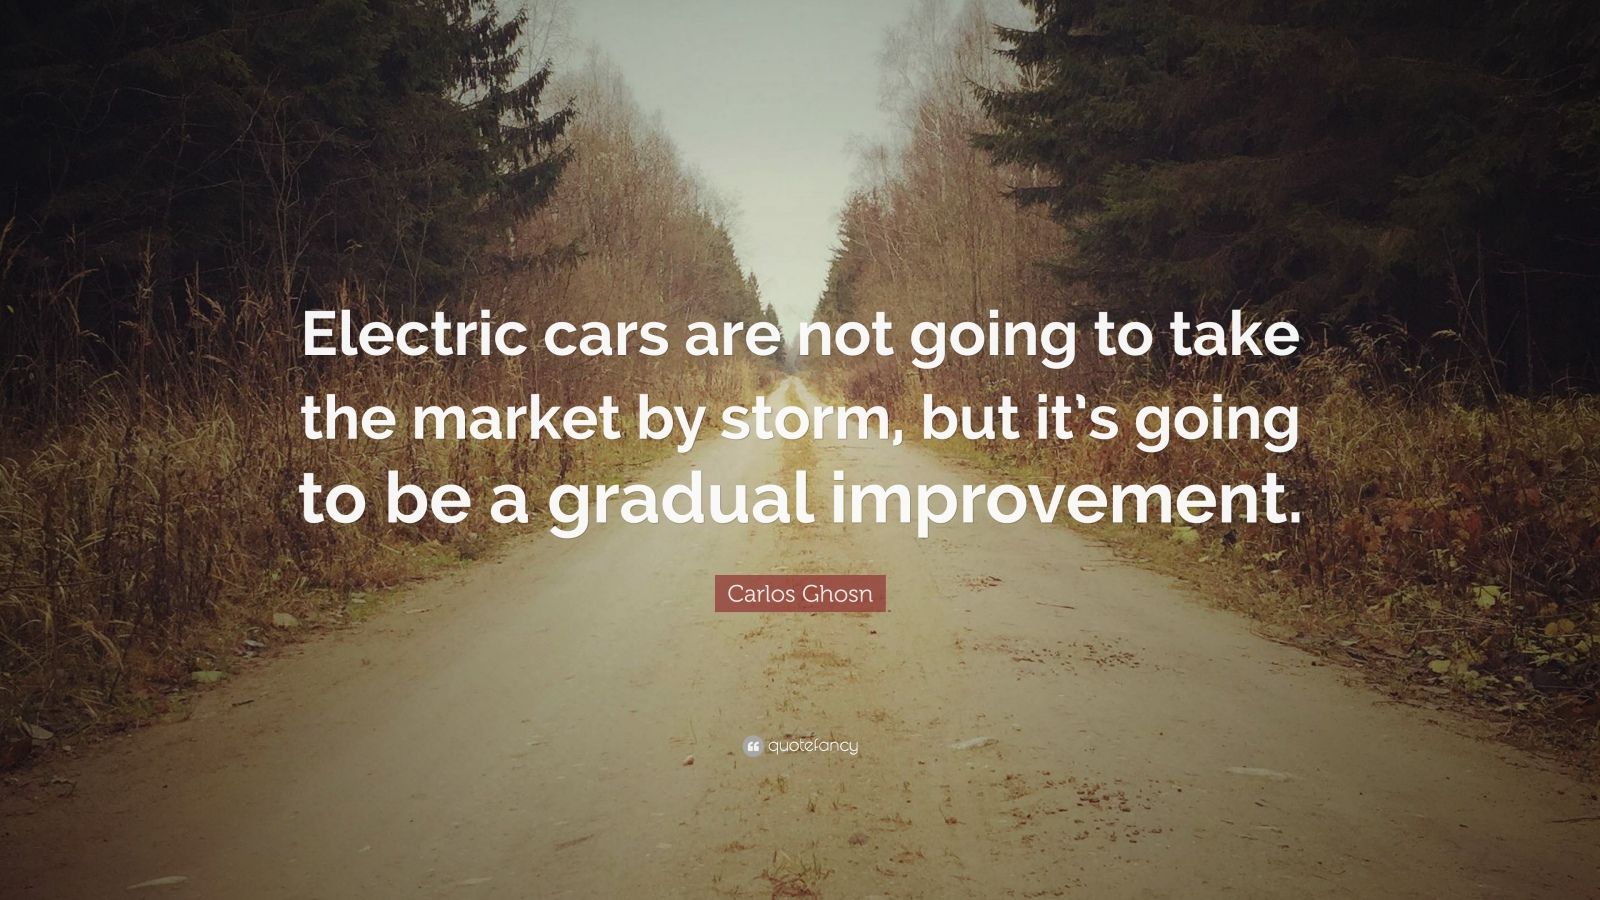 Carlos Ghosn Quote “Electric cars are not going to take the market by